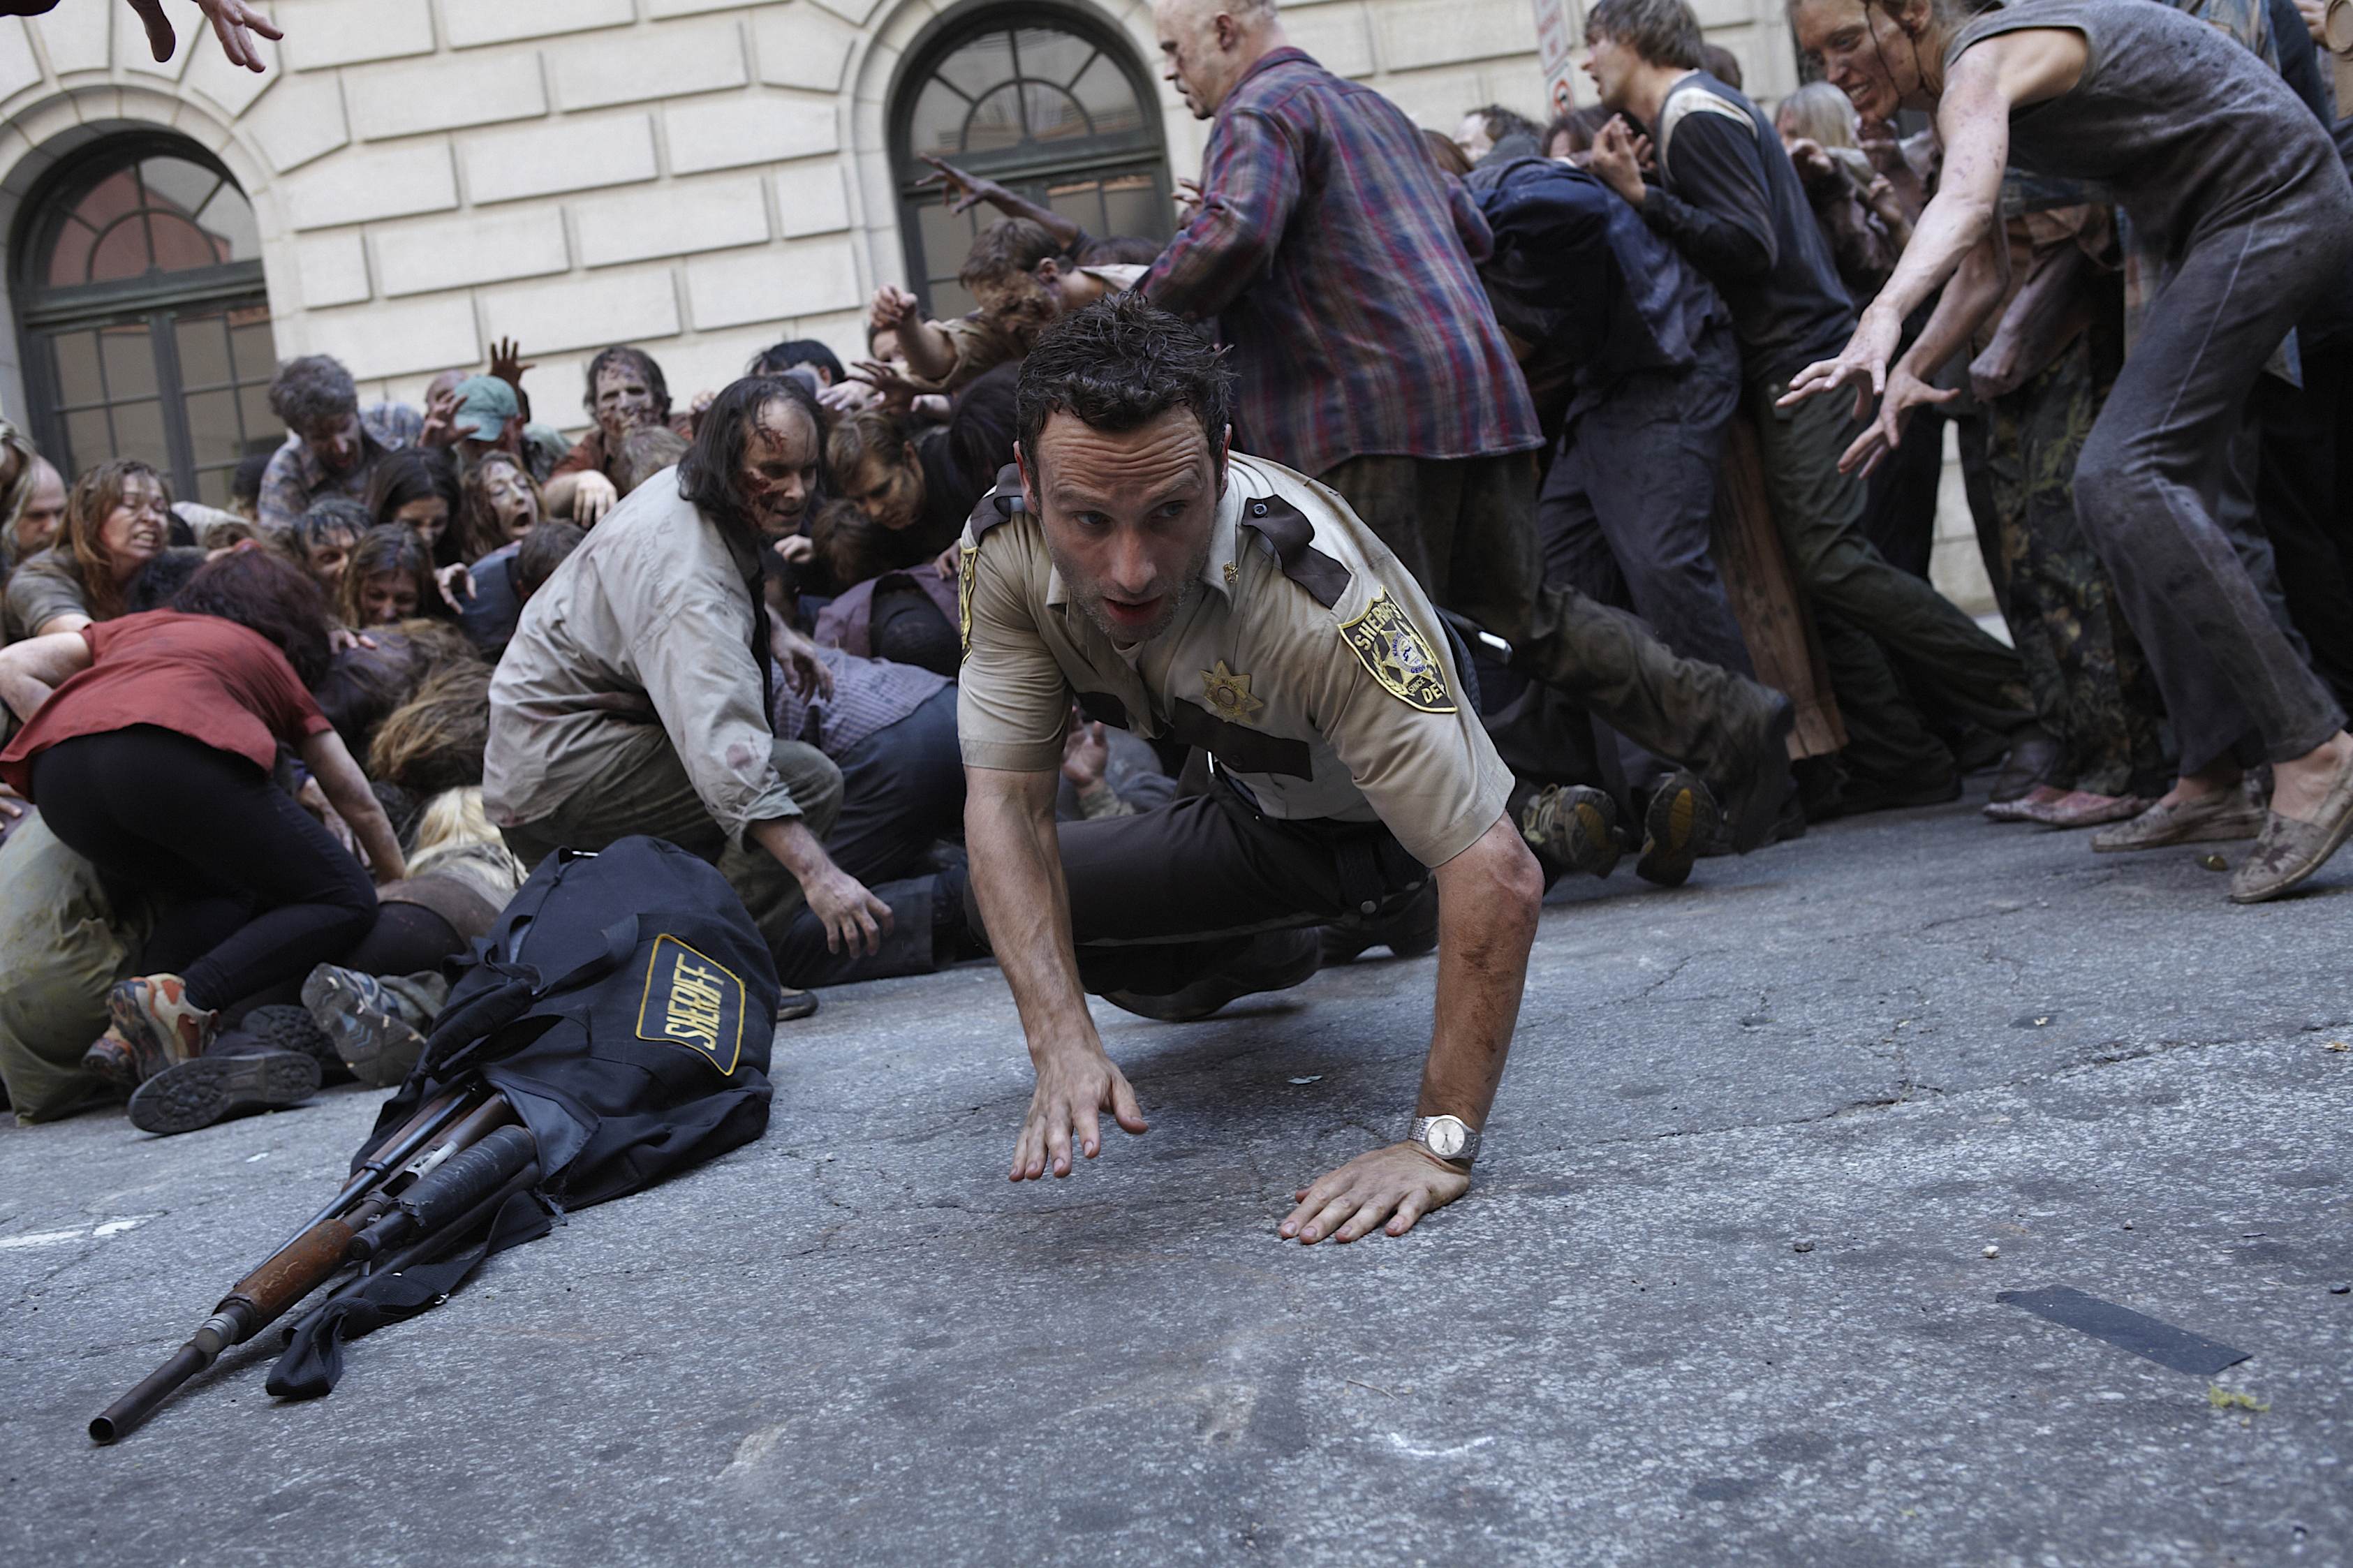 the walking dead is not universally praised for the content